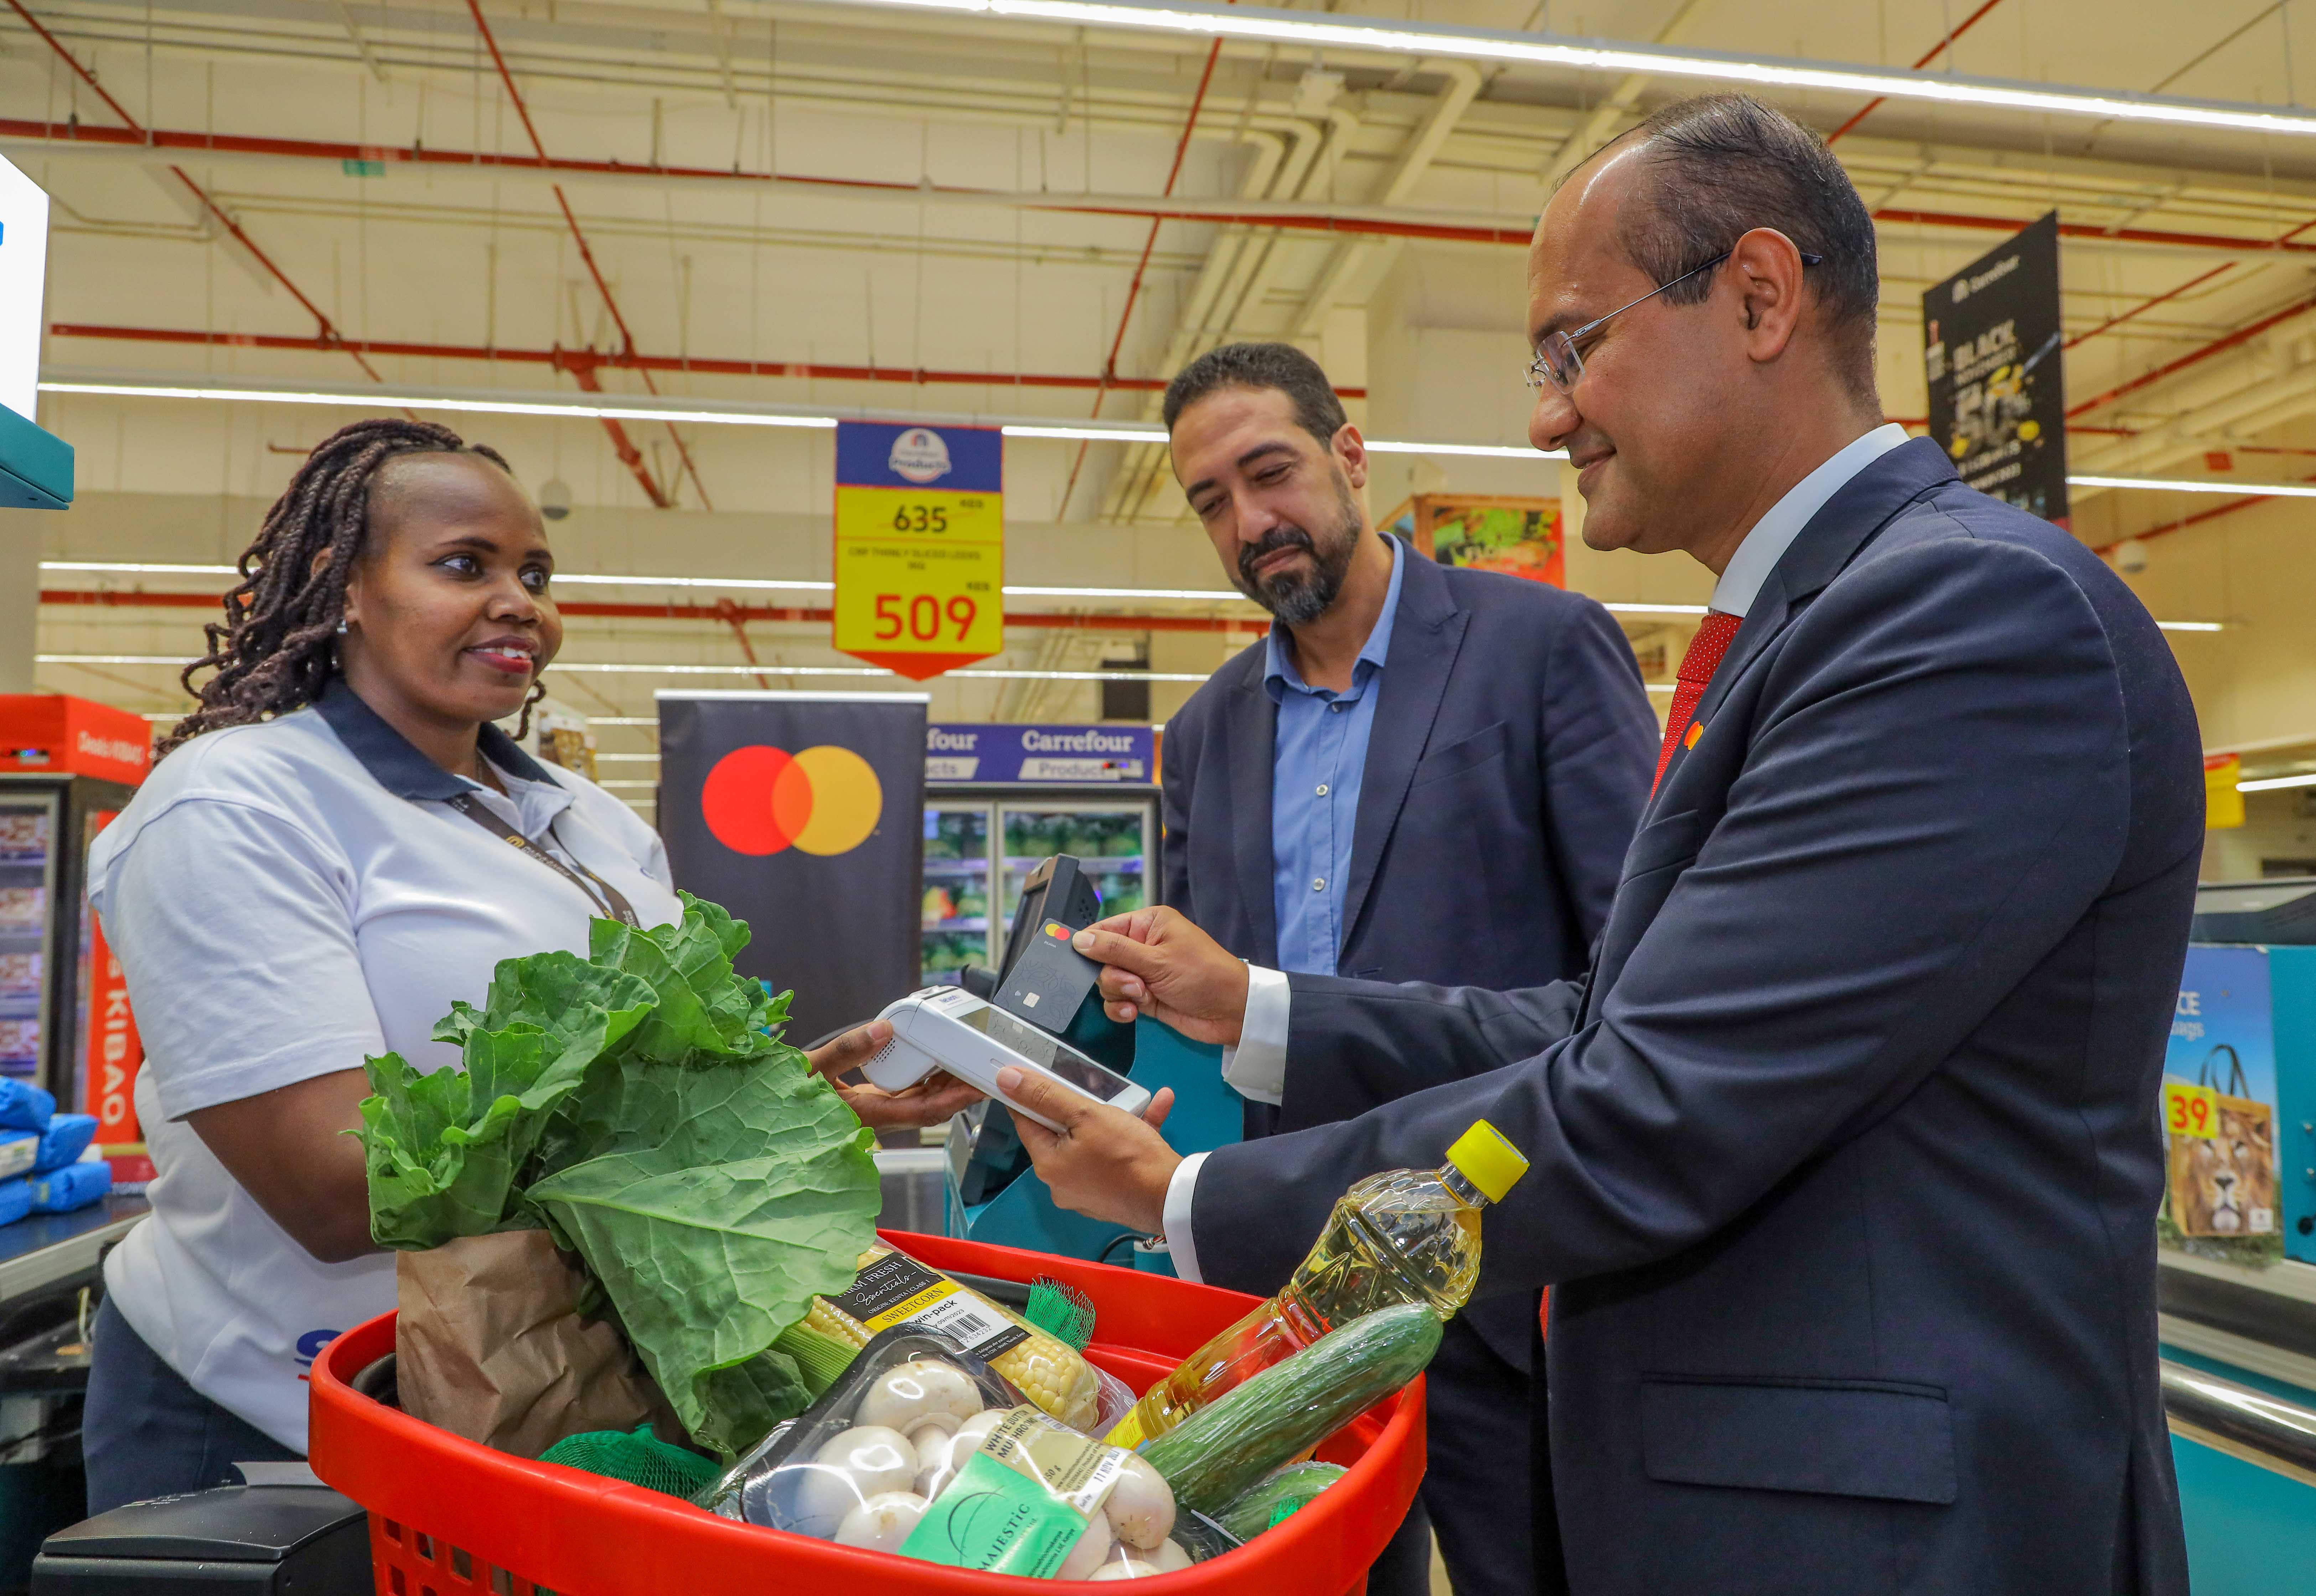 Rachid Nouri, Carrefour East Africa Regional Director for Finance, Majid Al Futtaim (centre) and Shehryar Ali, Senior Vice President and Country Manager for East Africa and Indian Ocean Islands, Mastercard (right) launch their festive season campaign offering a 20% discount for Mastercard users at Carrefour.